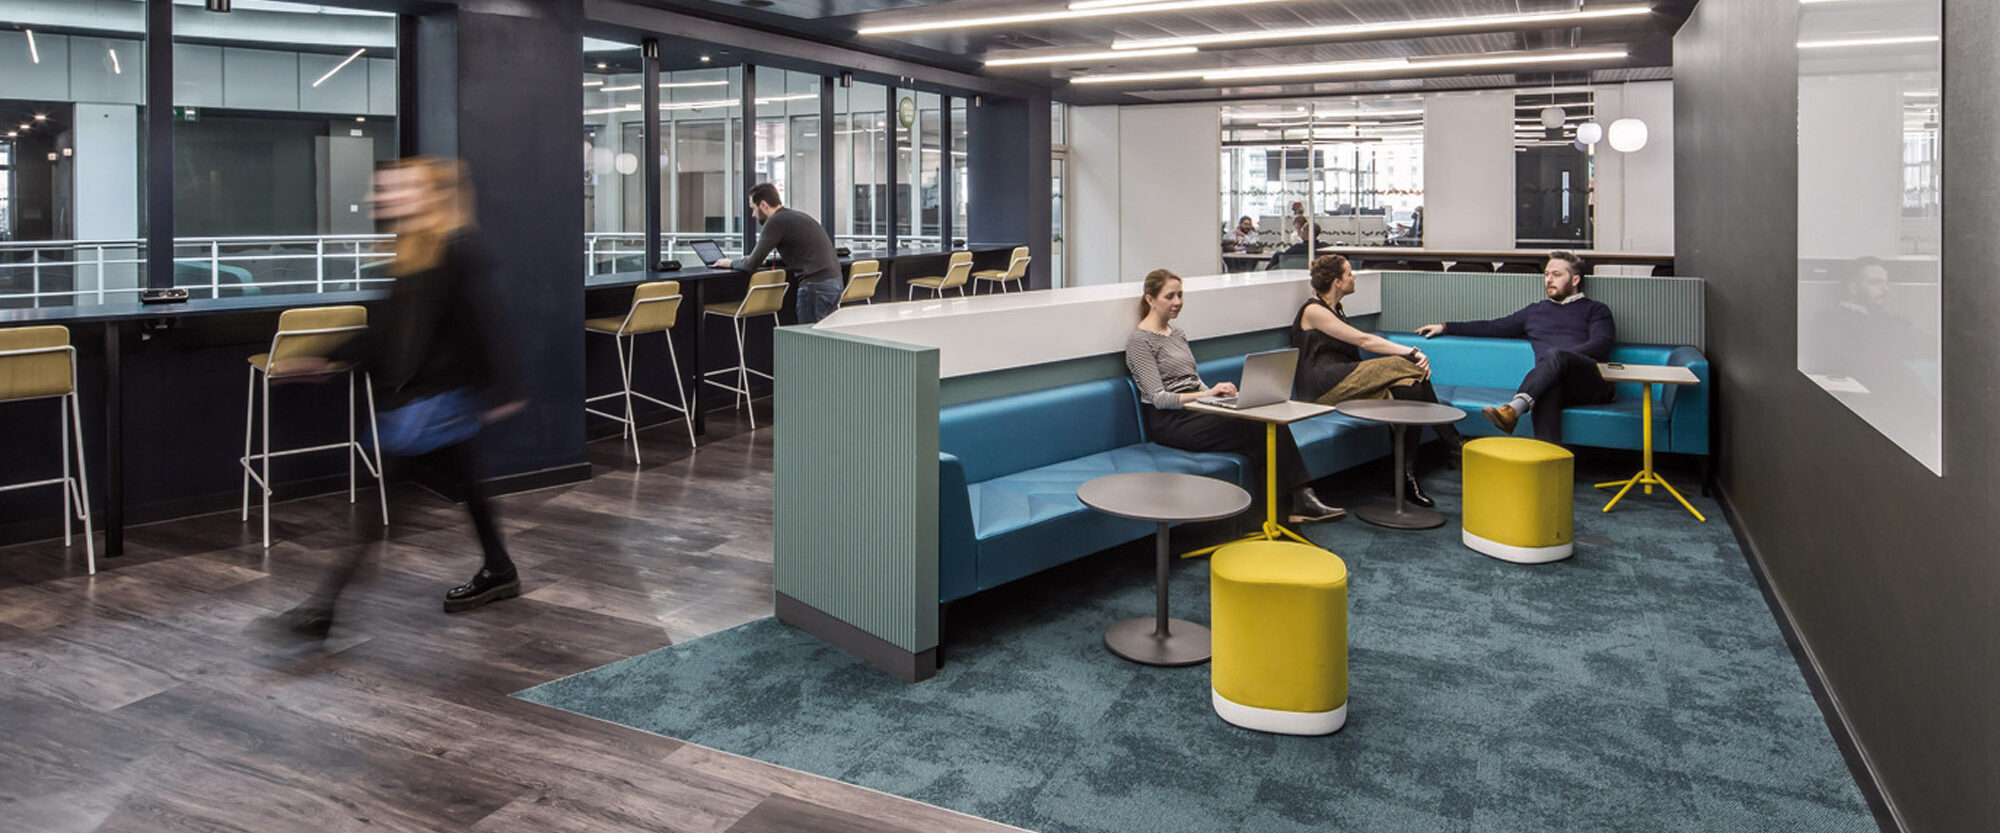 Modern office break area with sleek, linear lighting overhead, teal carpeting, and an eclectic mix of seating options including booths, stools, and pouffes. The space is accented by pops of bold yellow and cool blue tones, fostering a dynamic and collaborative environment.